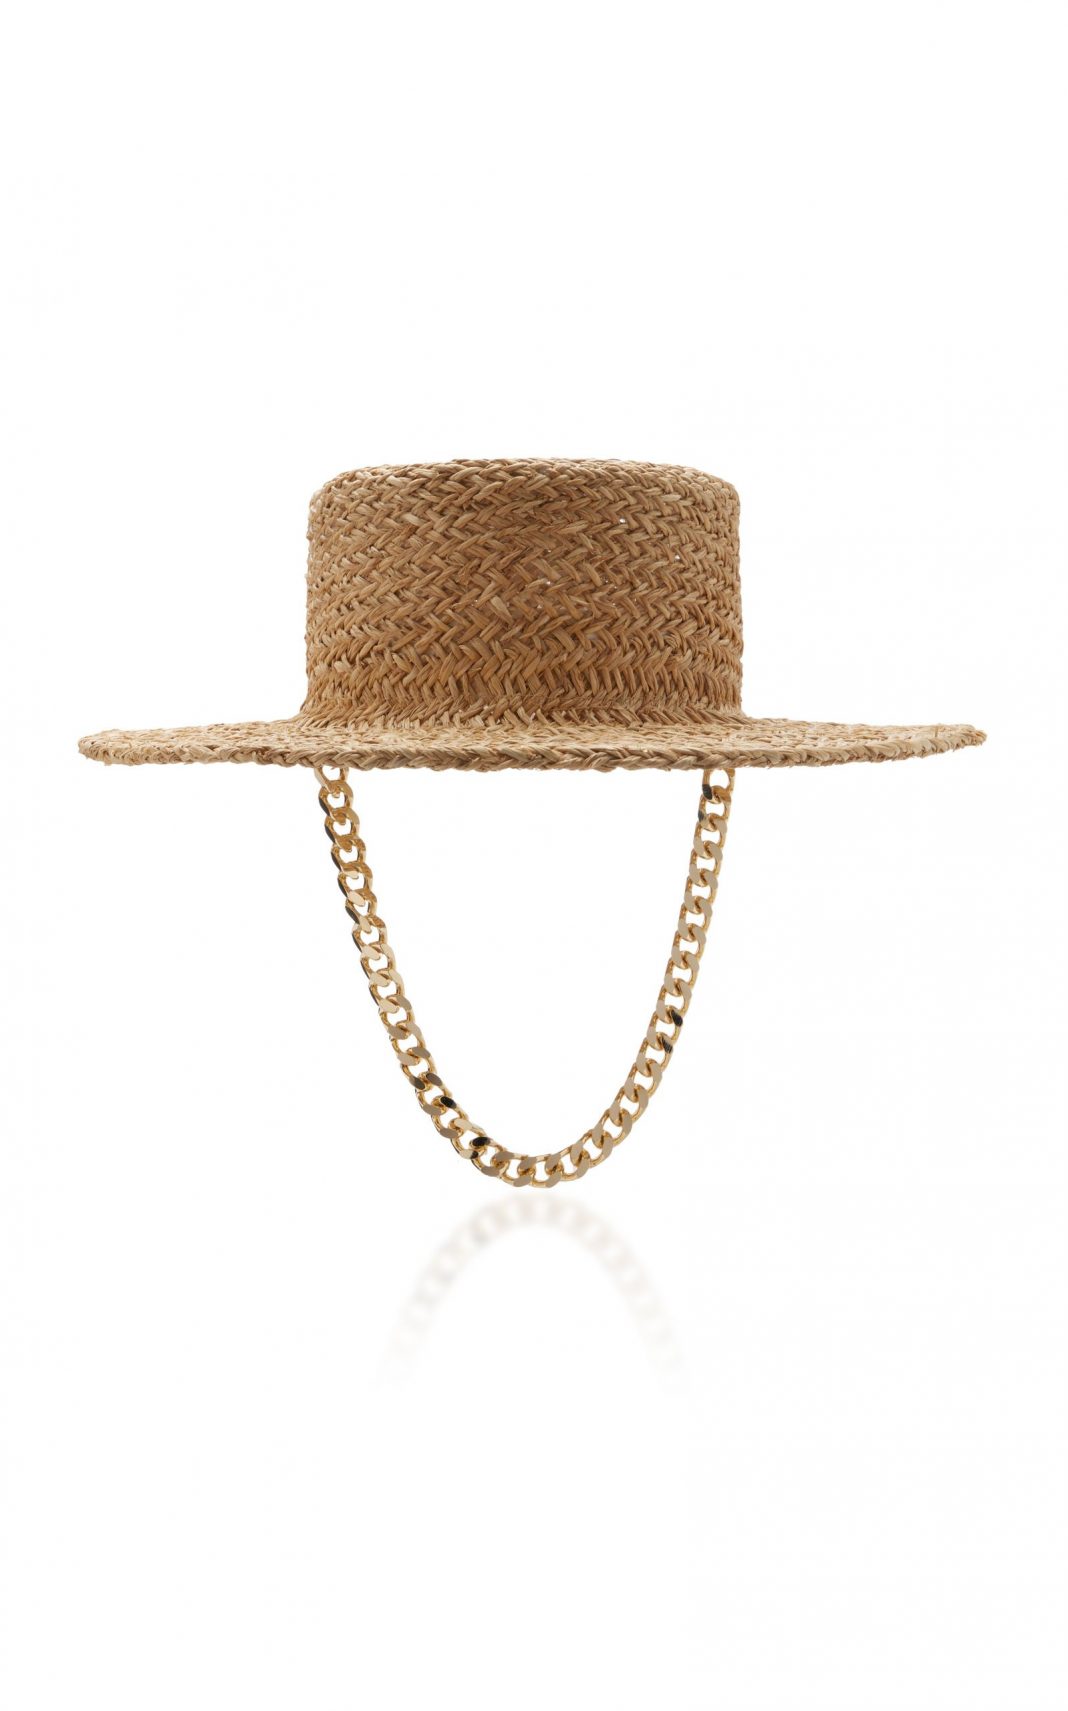 33 Best Hats For Fall to Go with All Your Clothes - leurr